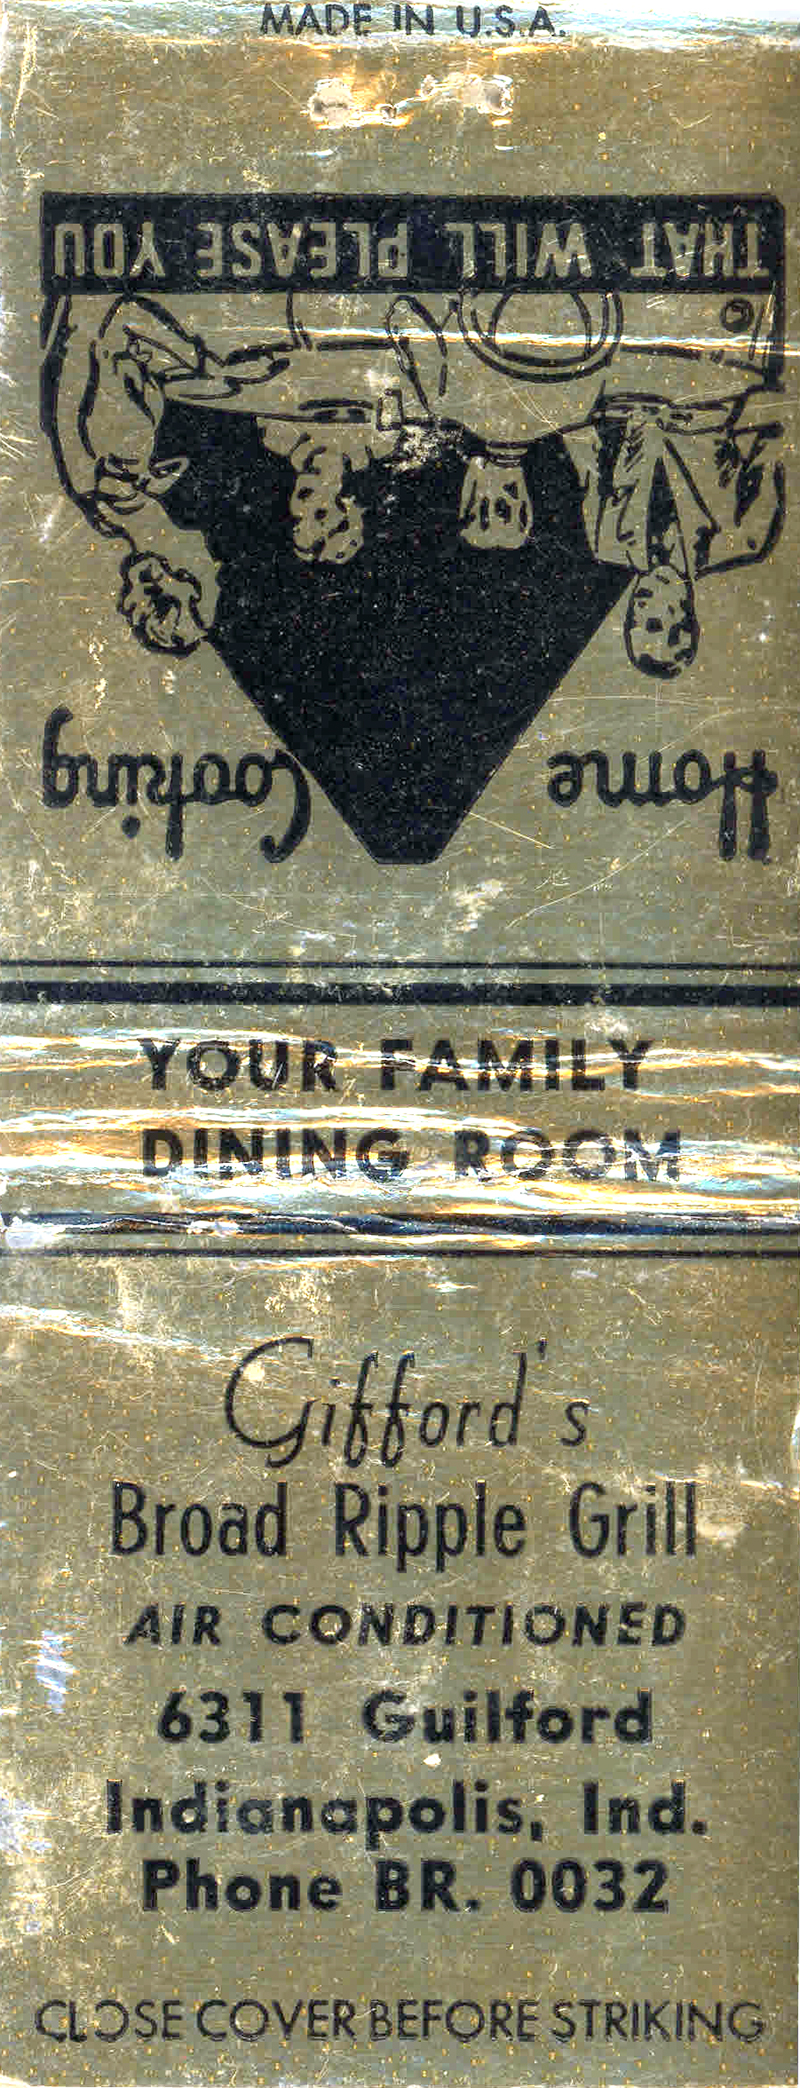 Gifford's Broad Ripple Grill